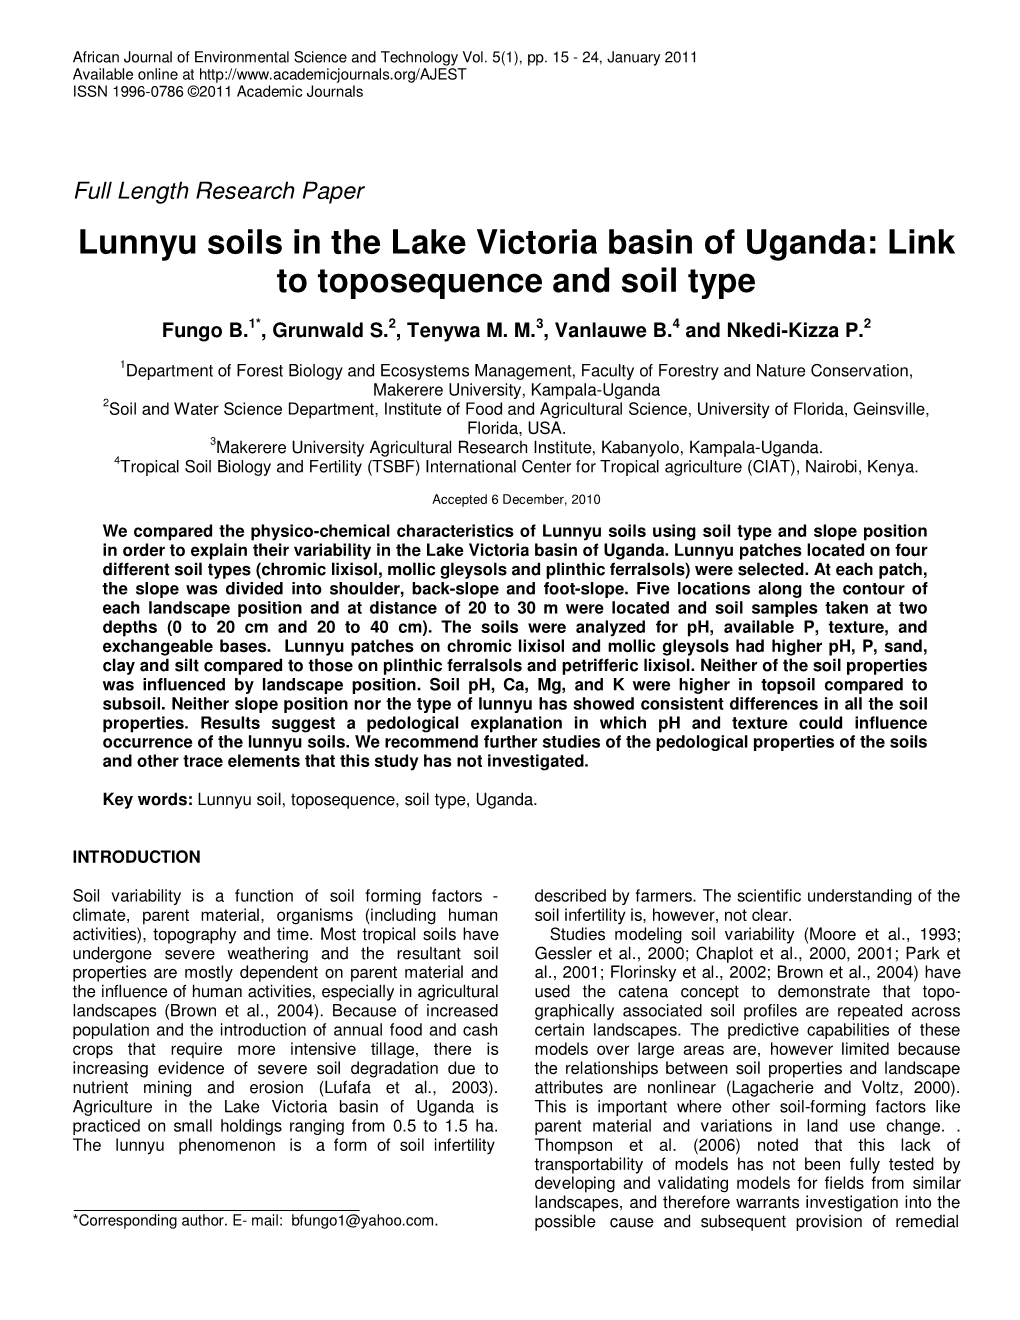 Lunnyu Soils in the Lake Victoria Basin of Uganda: Link to Toposequence and Soil Type